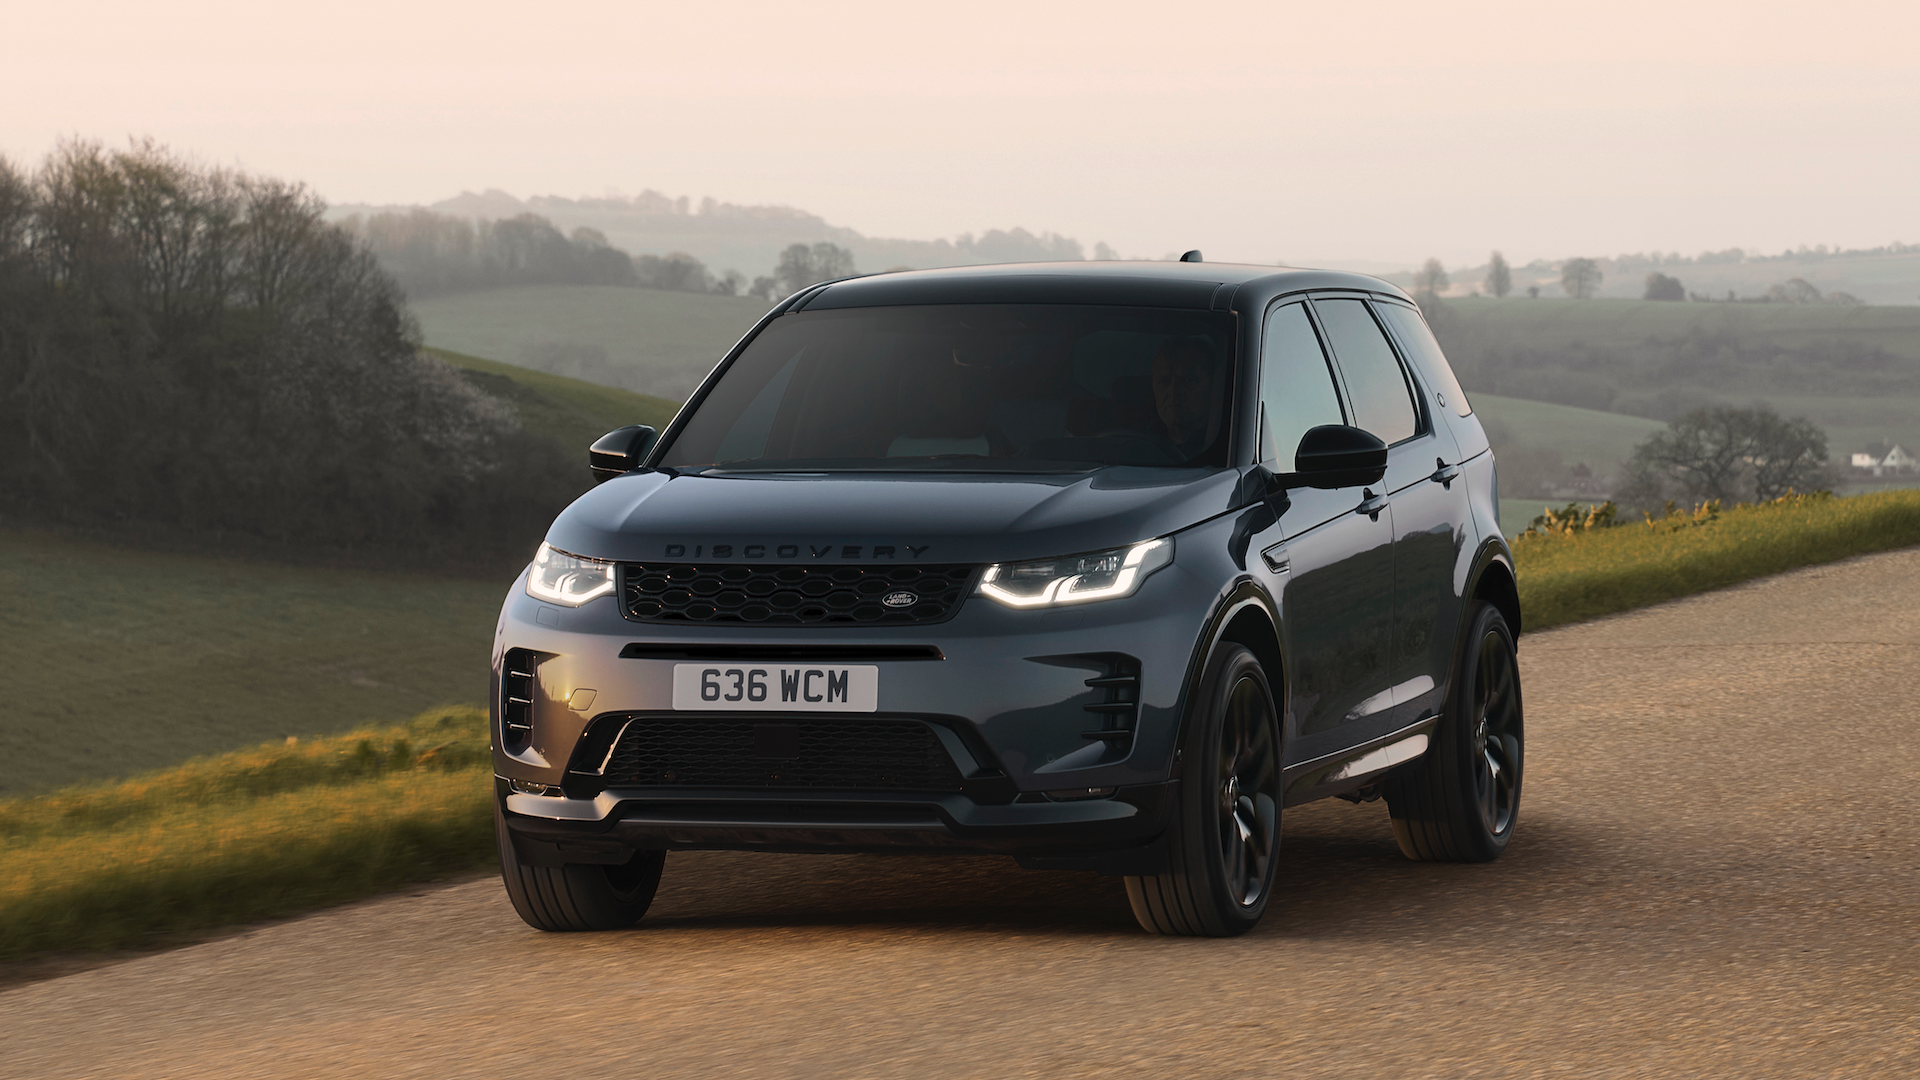 2020 Land Rover Range Rover Sport Review & Ratings